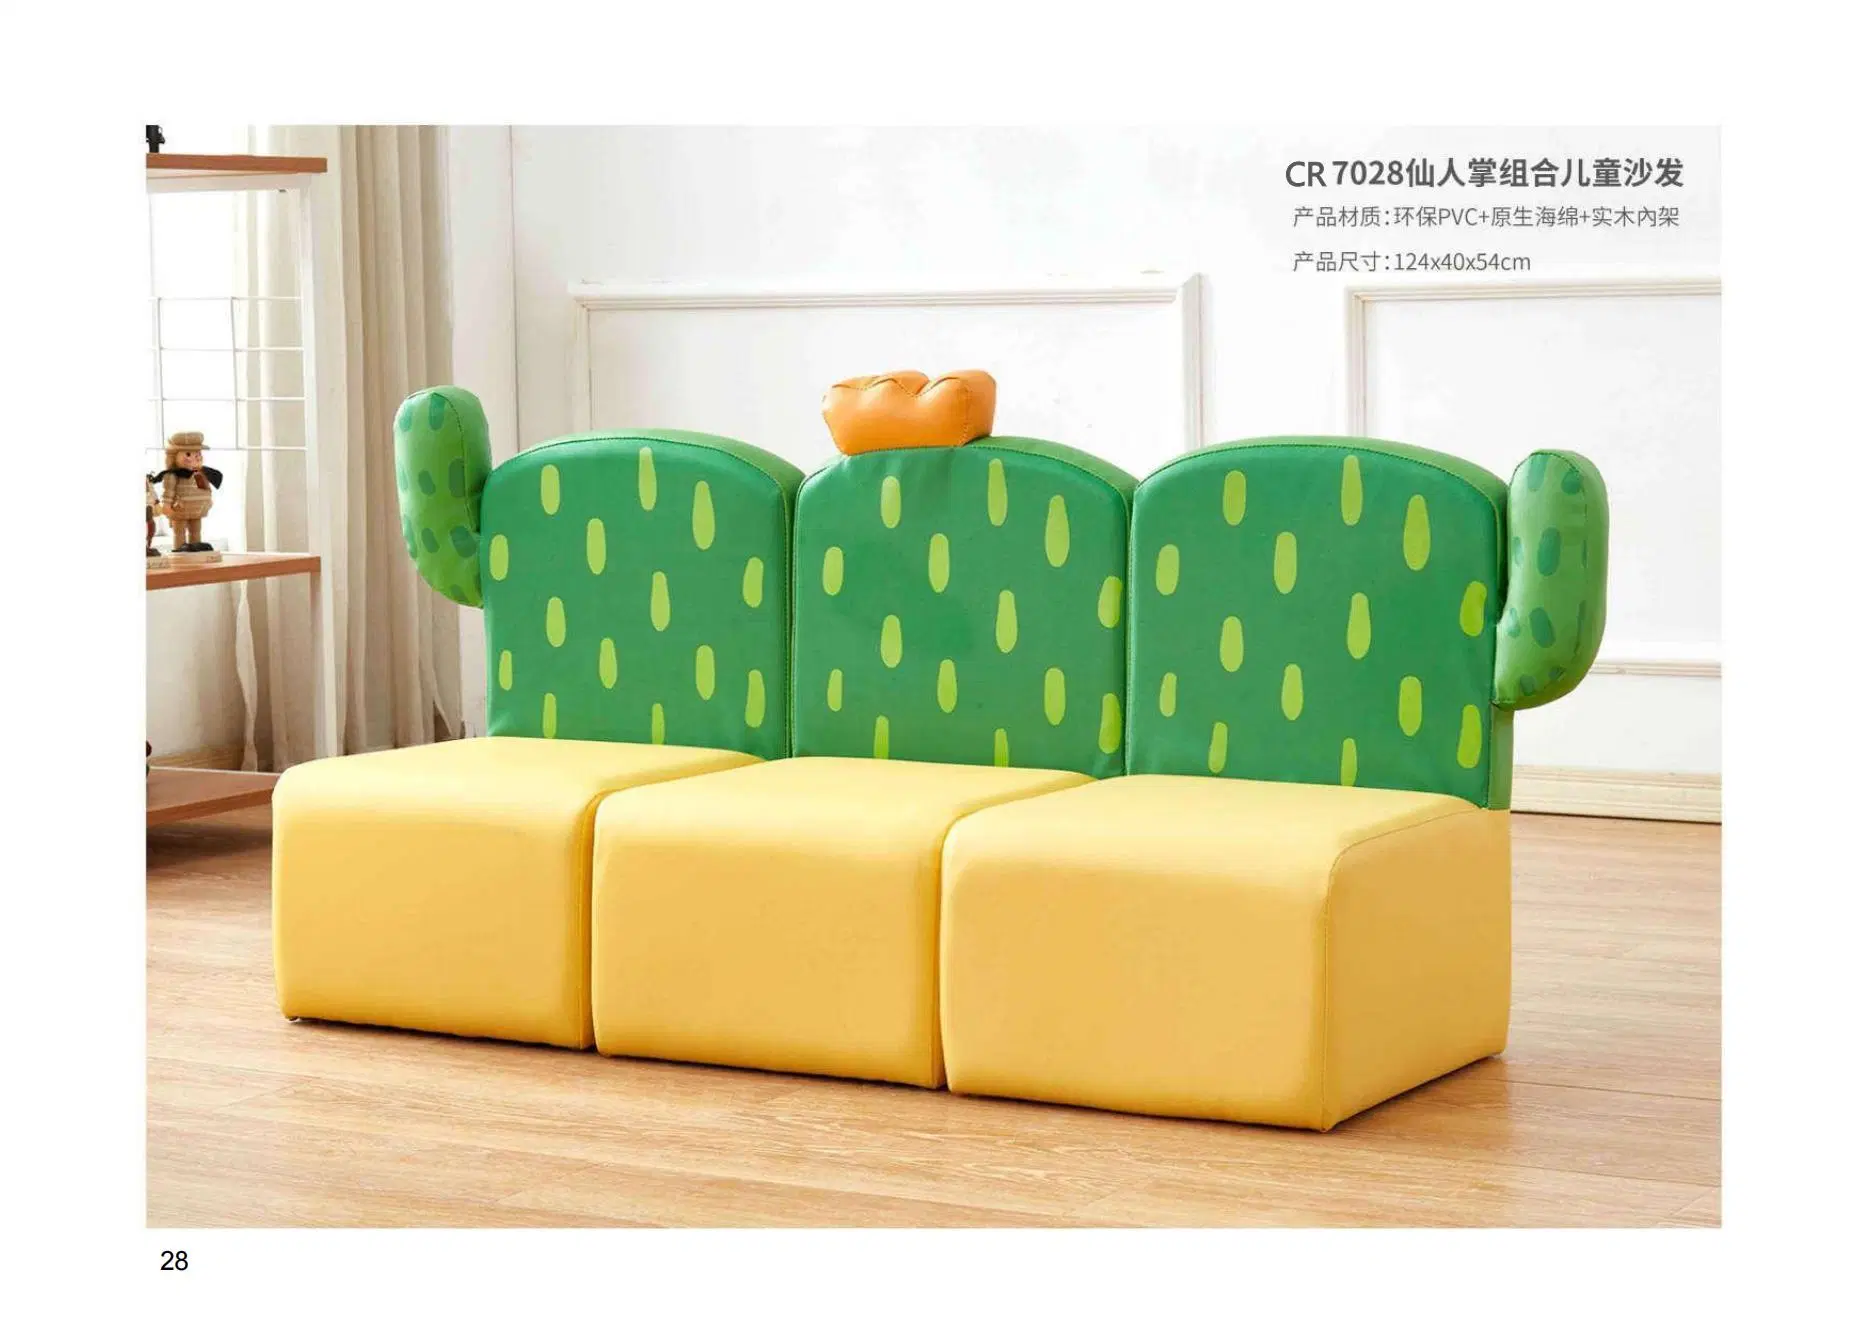 Baby and Children Sofa, Living and Reading Room Sofa, Day Care Center Sofa Style, New Design Cartoon Children&prime; S Sofa